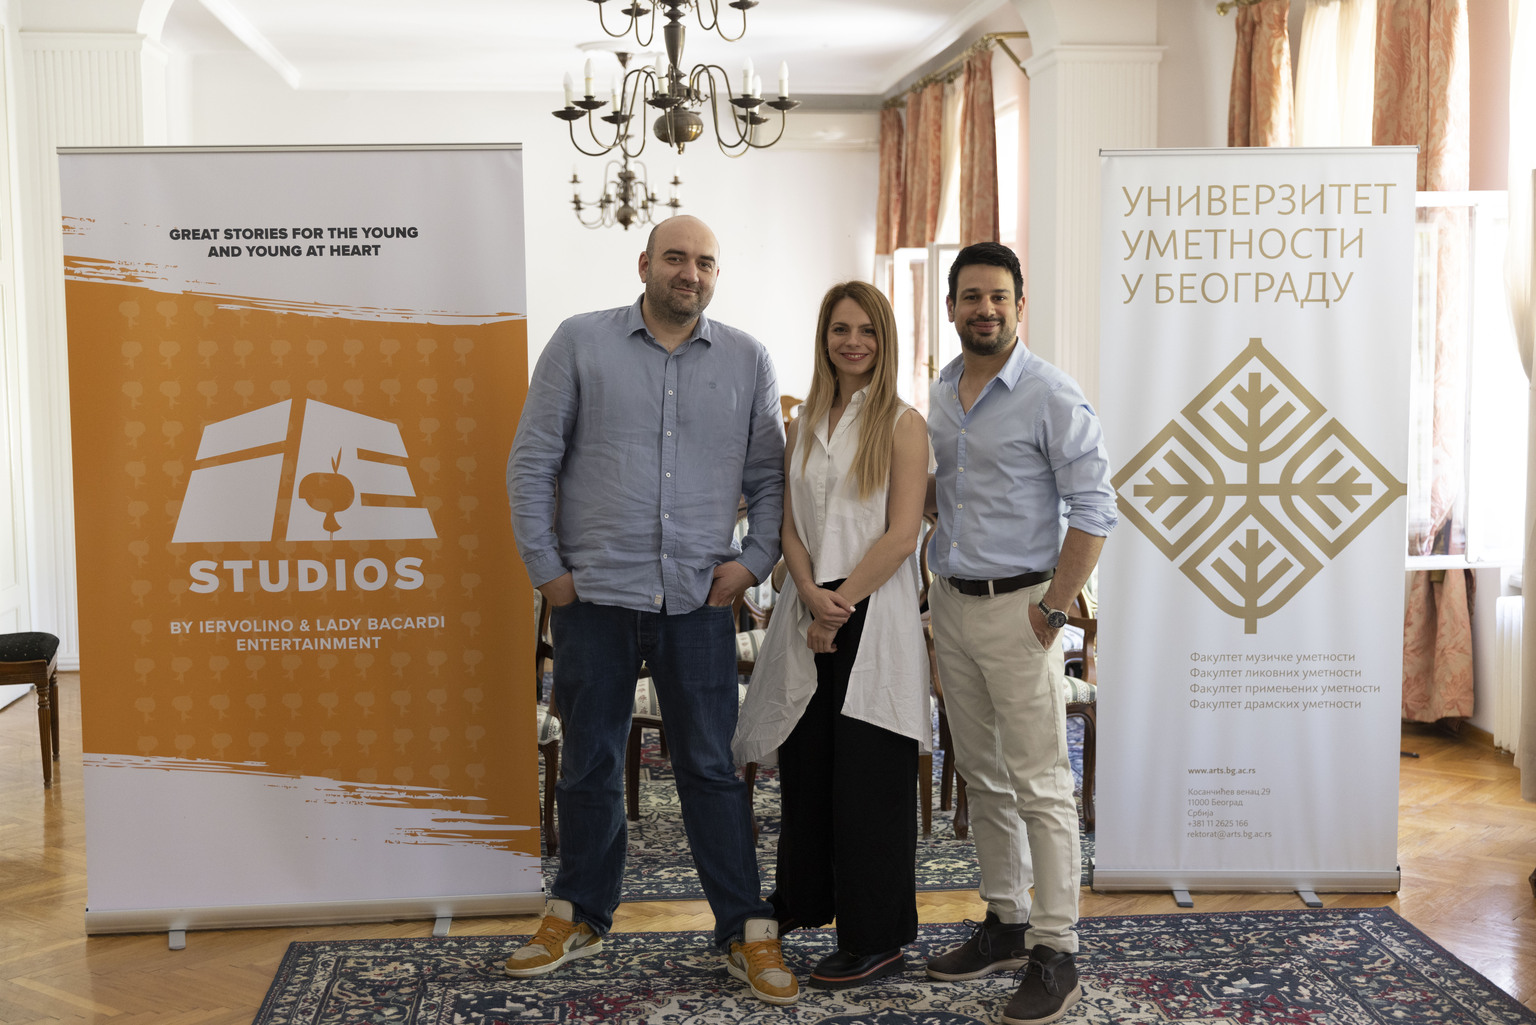 Nikola Puric, Production Director & Senior Animation Picture Editor at IES; Andjelka Jankovic, Head of Marketing & Communication at IES; Peter Nalli, Head of Animation & VFX at ILBE Group